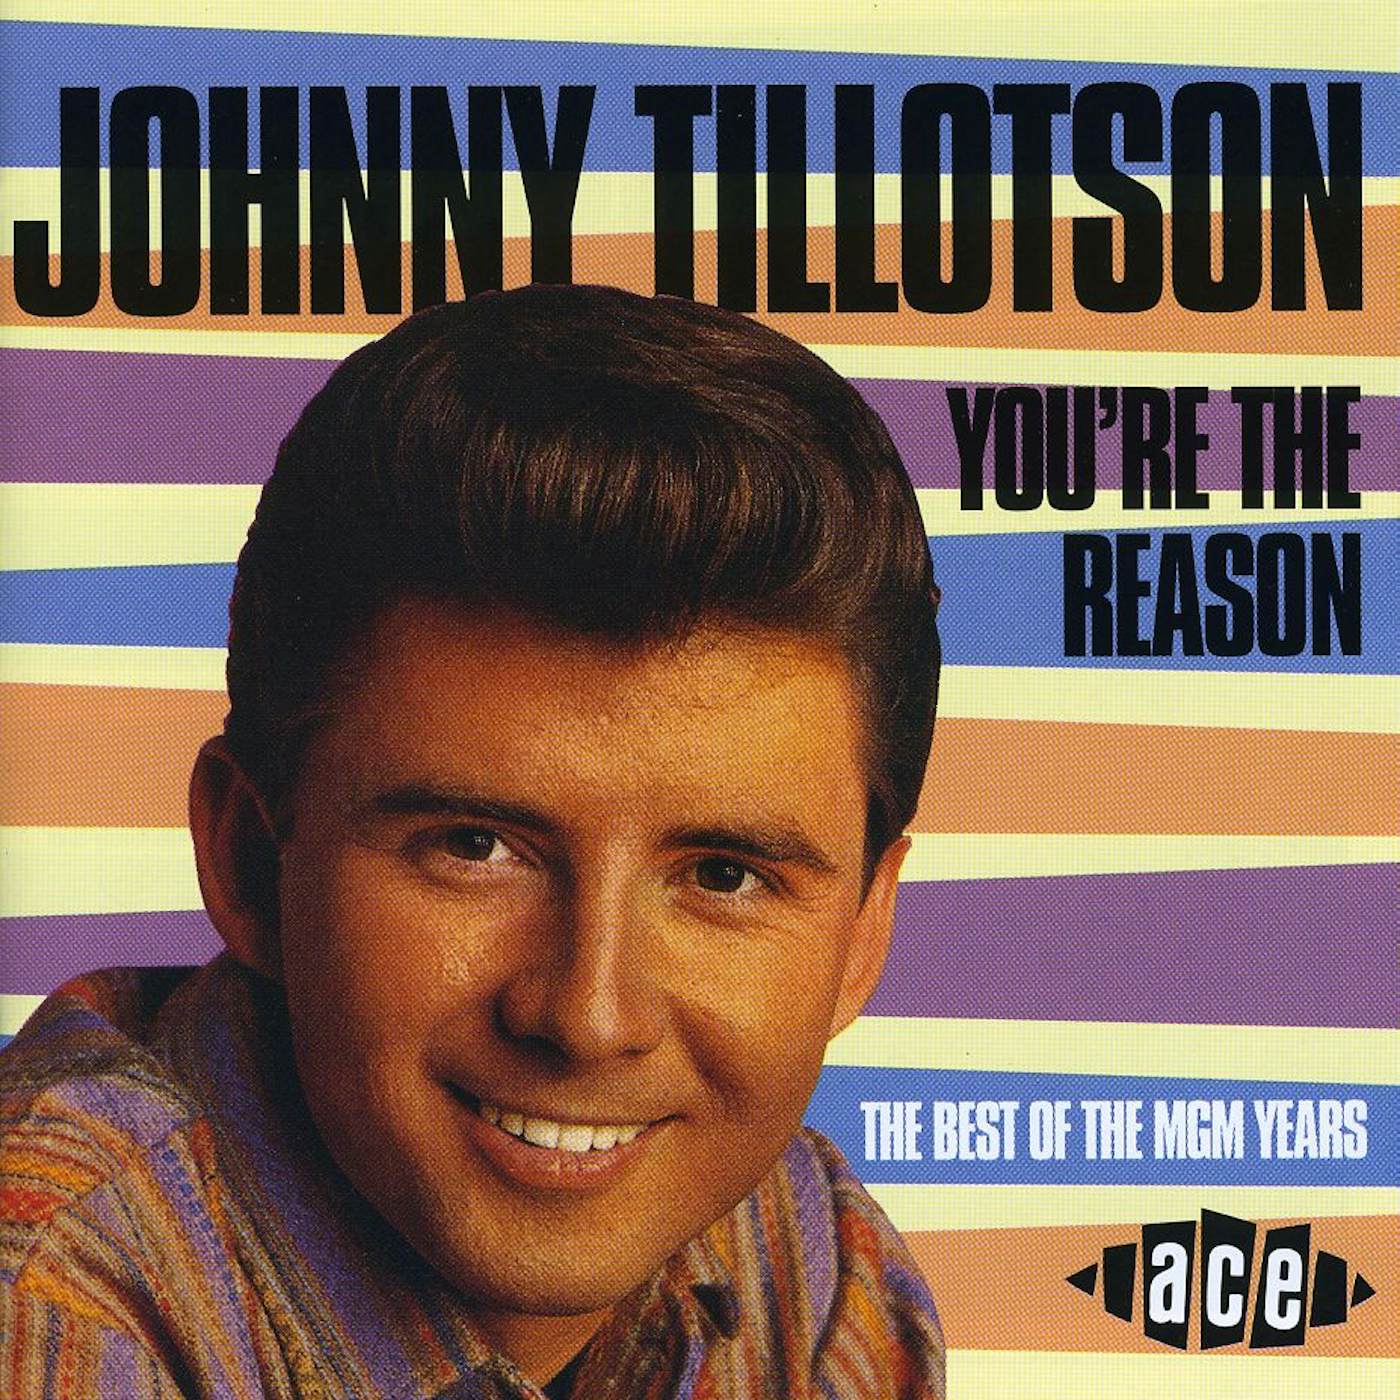 Johnny Tillotson YOU'RE THE REASON: BEST OF MGM YEARS CD